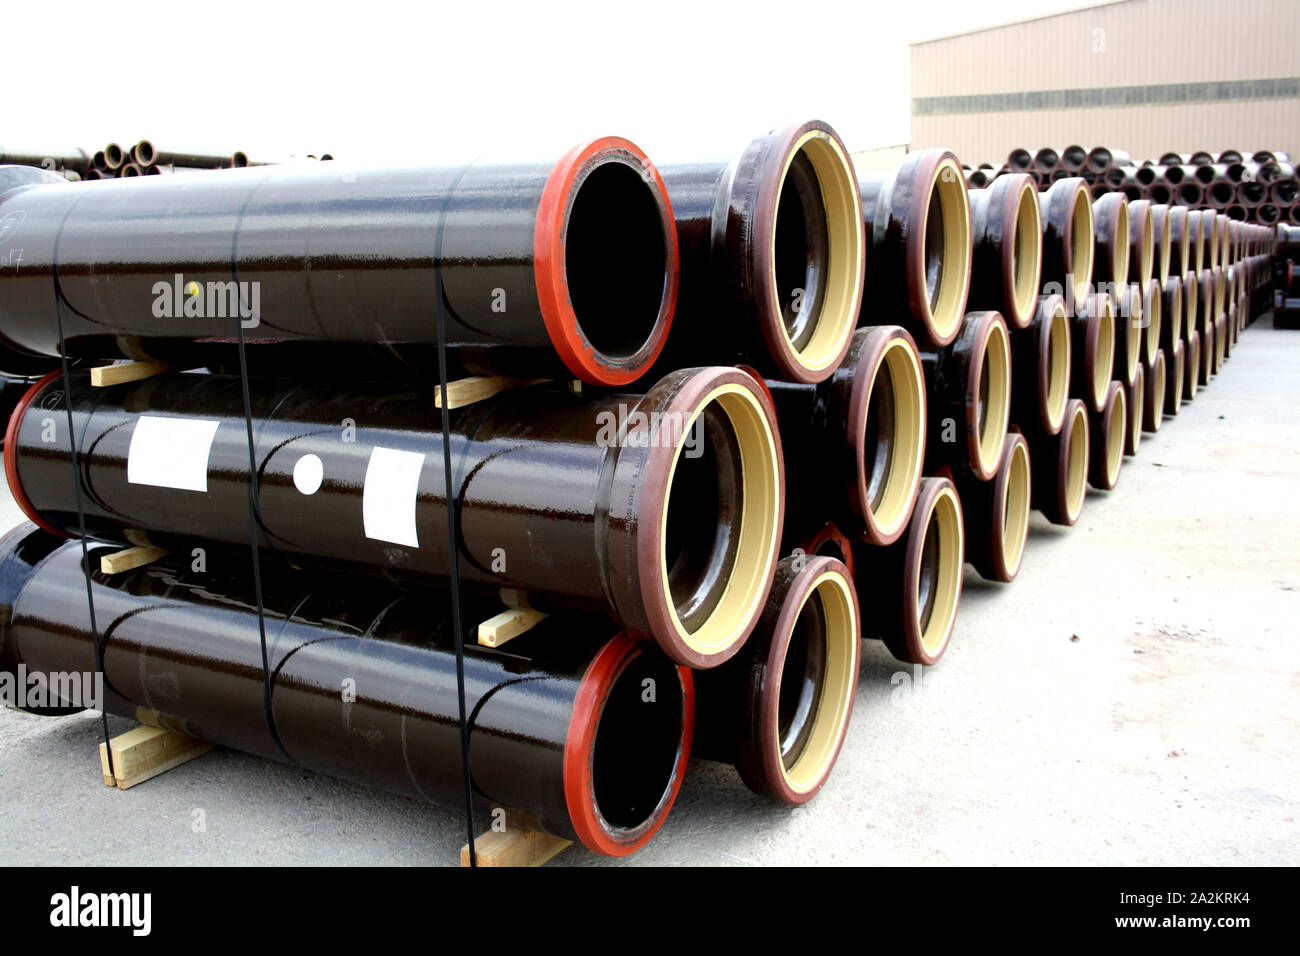 Stacks of PVC and ceramic water pipes - Image Stock Photo